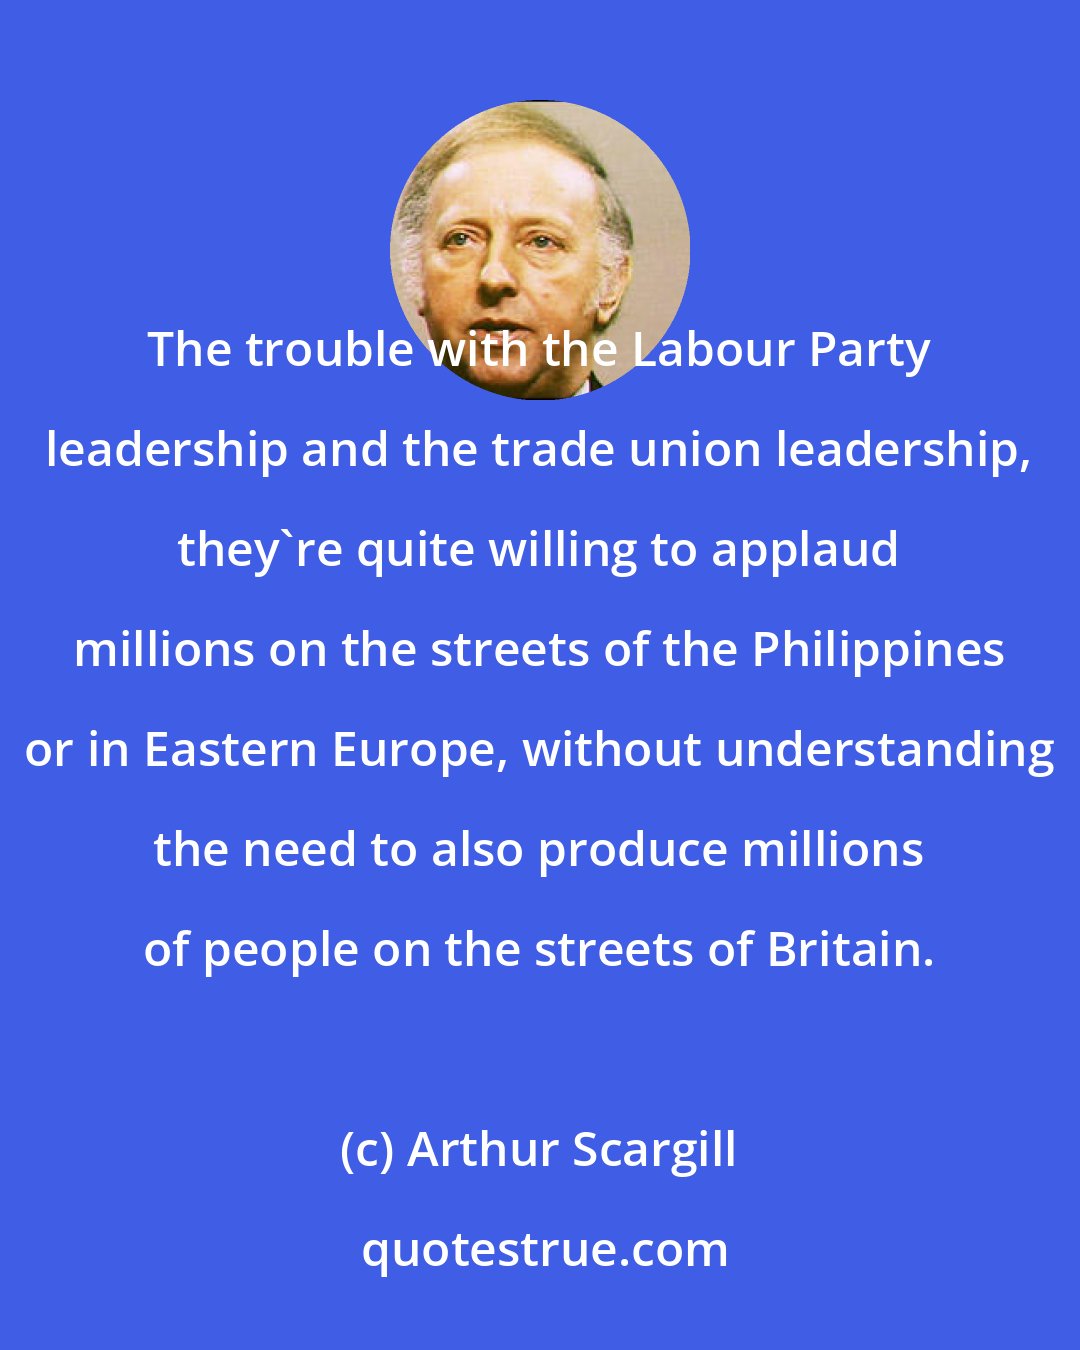 Arthur Scargill: The trouble with the Labour Party leadership and the trade union leadership, they're quite willing to applaud millions on the streets of the Philippines or in Eastern Europe, without understanding the need to also produce millions of people on the streets of Britain.